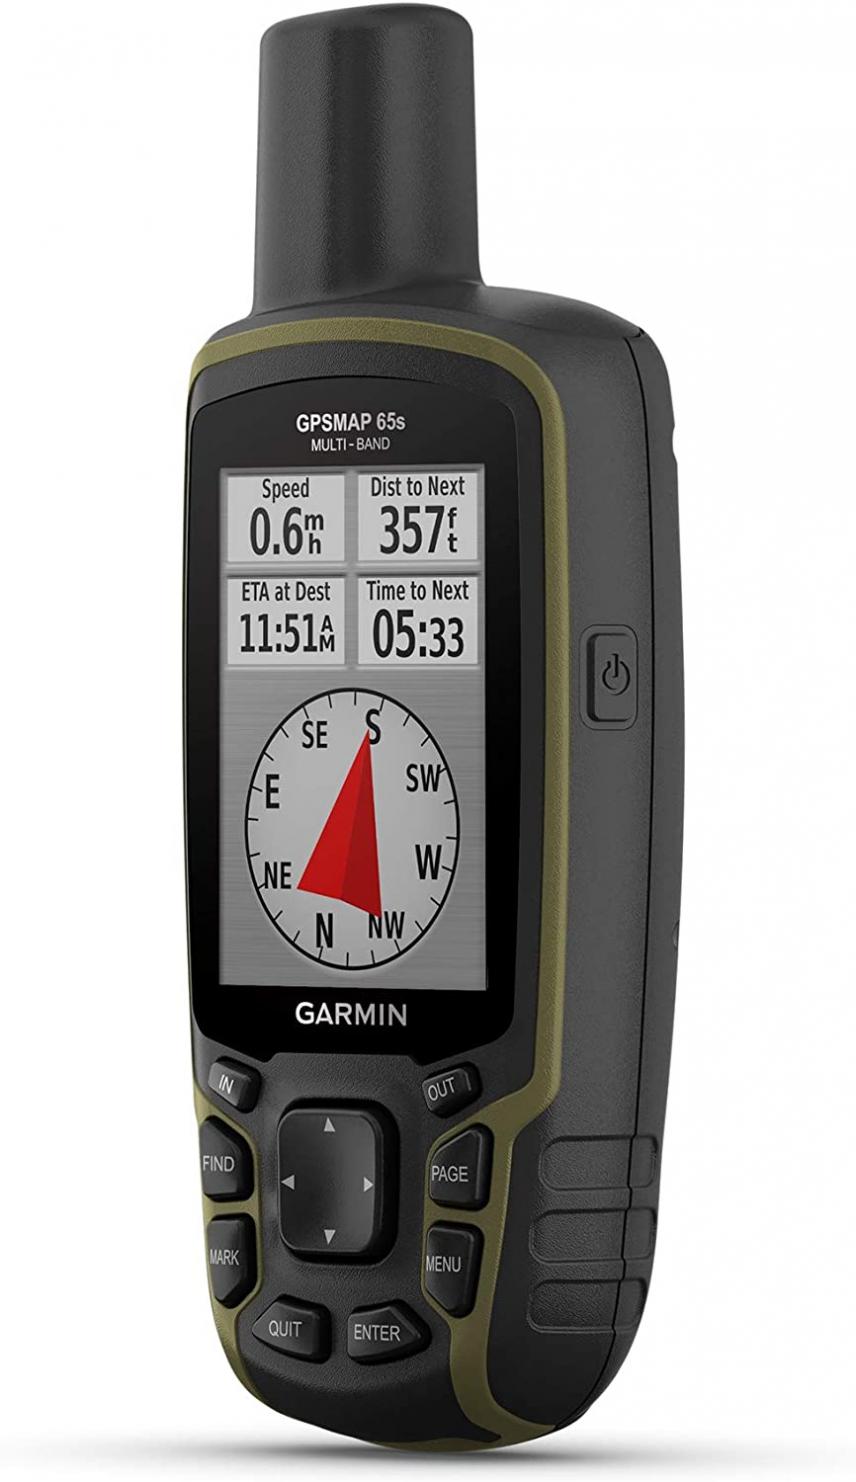 Garmin GPSMAP 65s, Button-Operated Handheld with Altimeter and Compass, Expanded Satellite Support and Multi-Band Technology, 2.6" Color Display (Renewed)